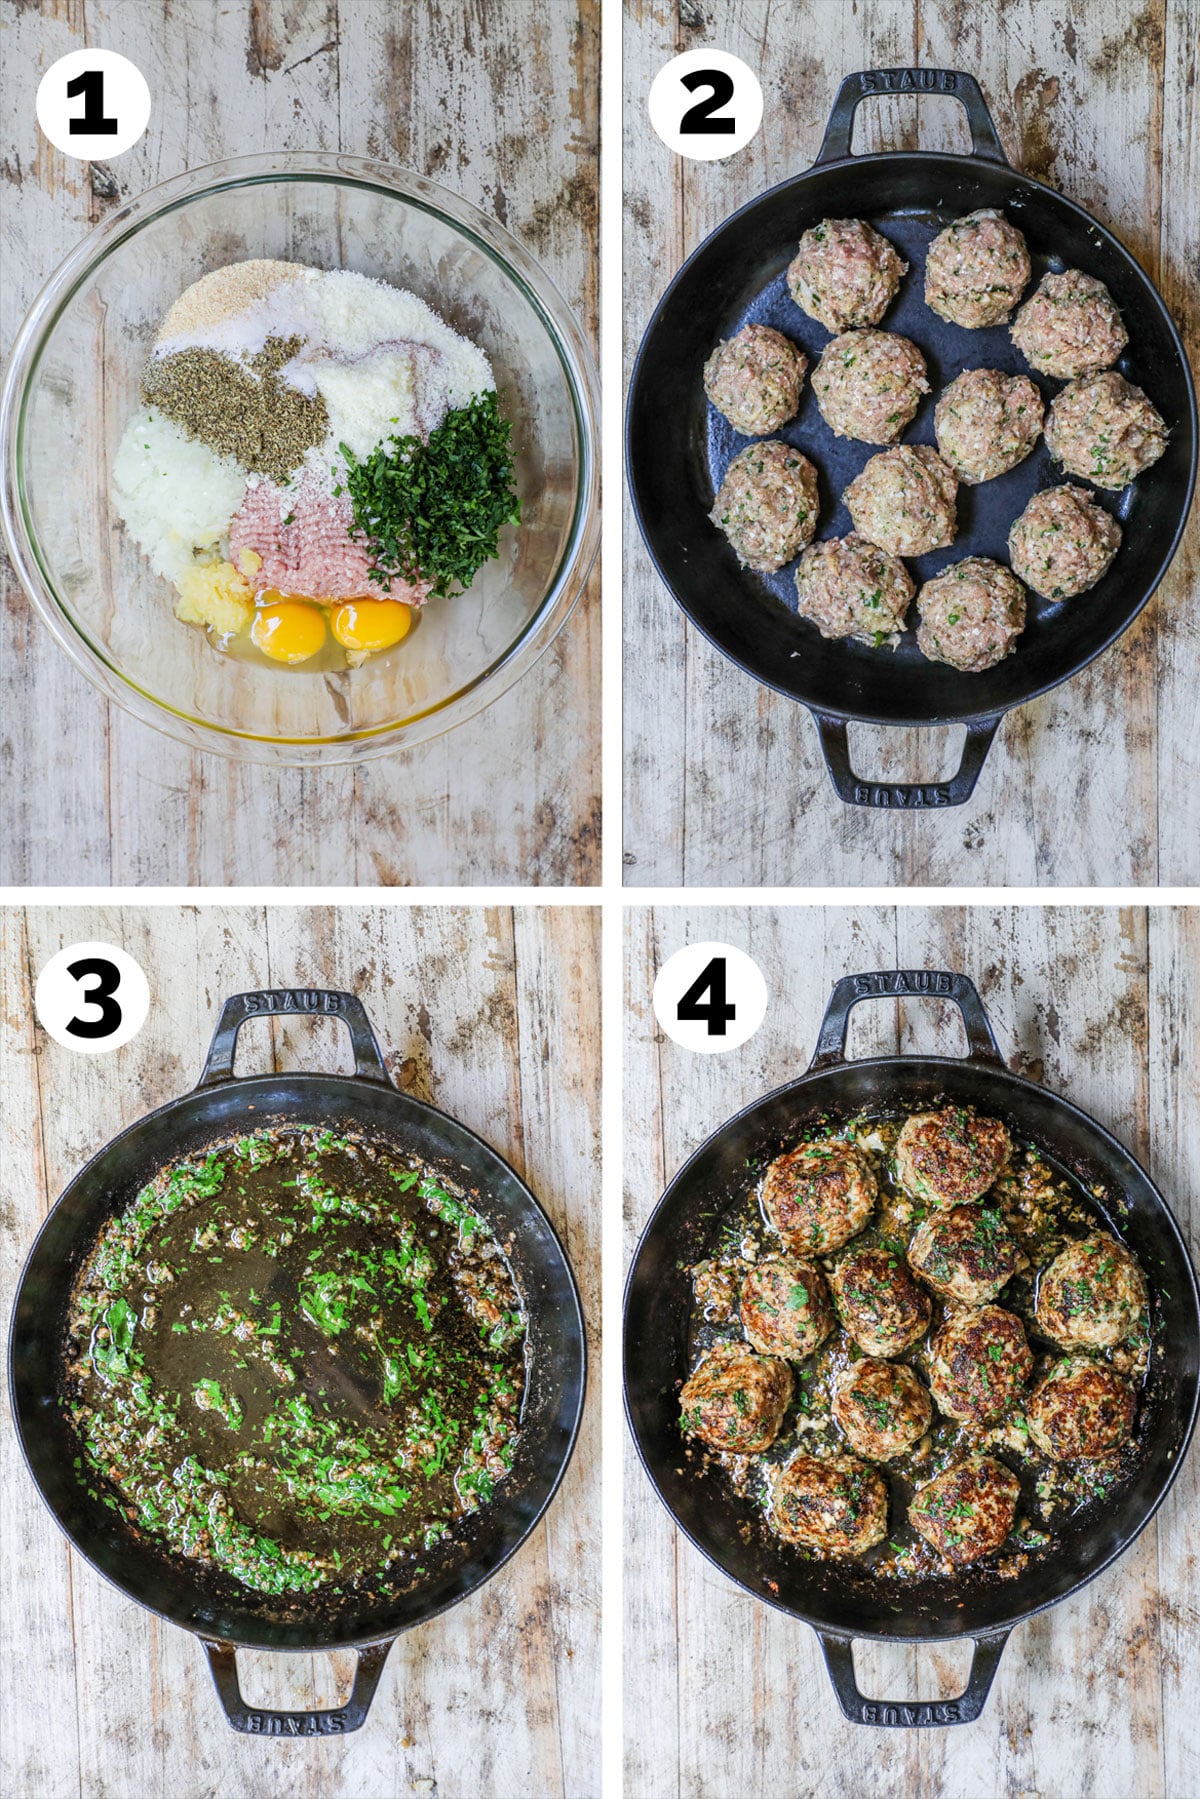 Process photos for how to make garlic butter meatballs: 1. Combine ground turkey, seasonings, garlic, butter, parmesan in a mixing bowl. 2. form into meatballs and brown on each side in skillet. 3. Make garlic butter sauce. 4. Place meatballs in garlic butter sauce and bake to finish.